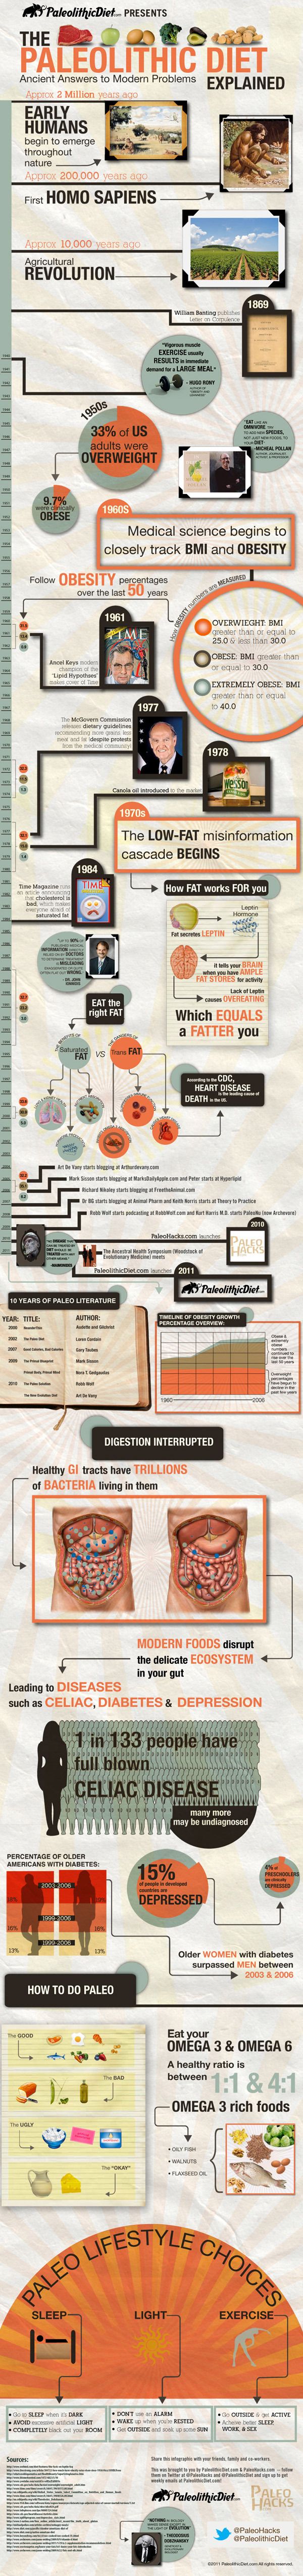 The Paleolithic Diet: Eat Like a Caveman, Live Like a King  #inforgraphic